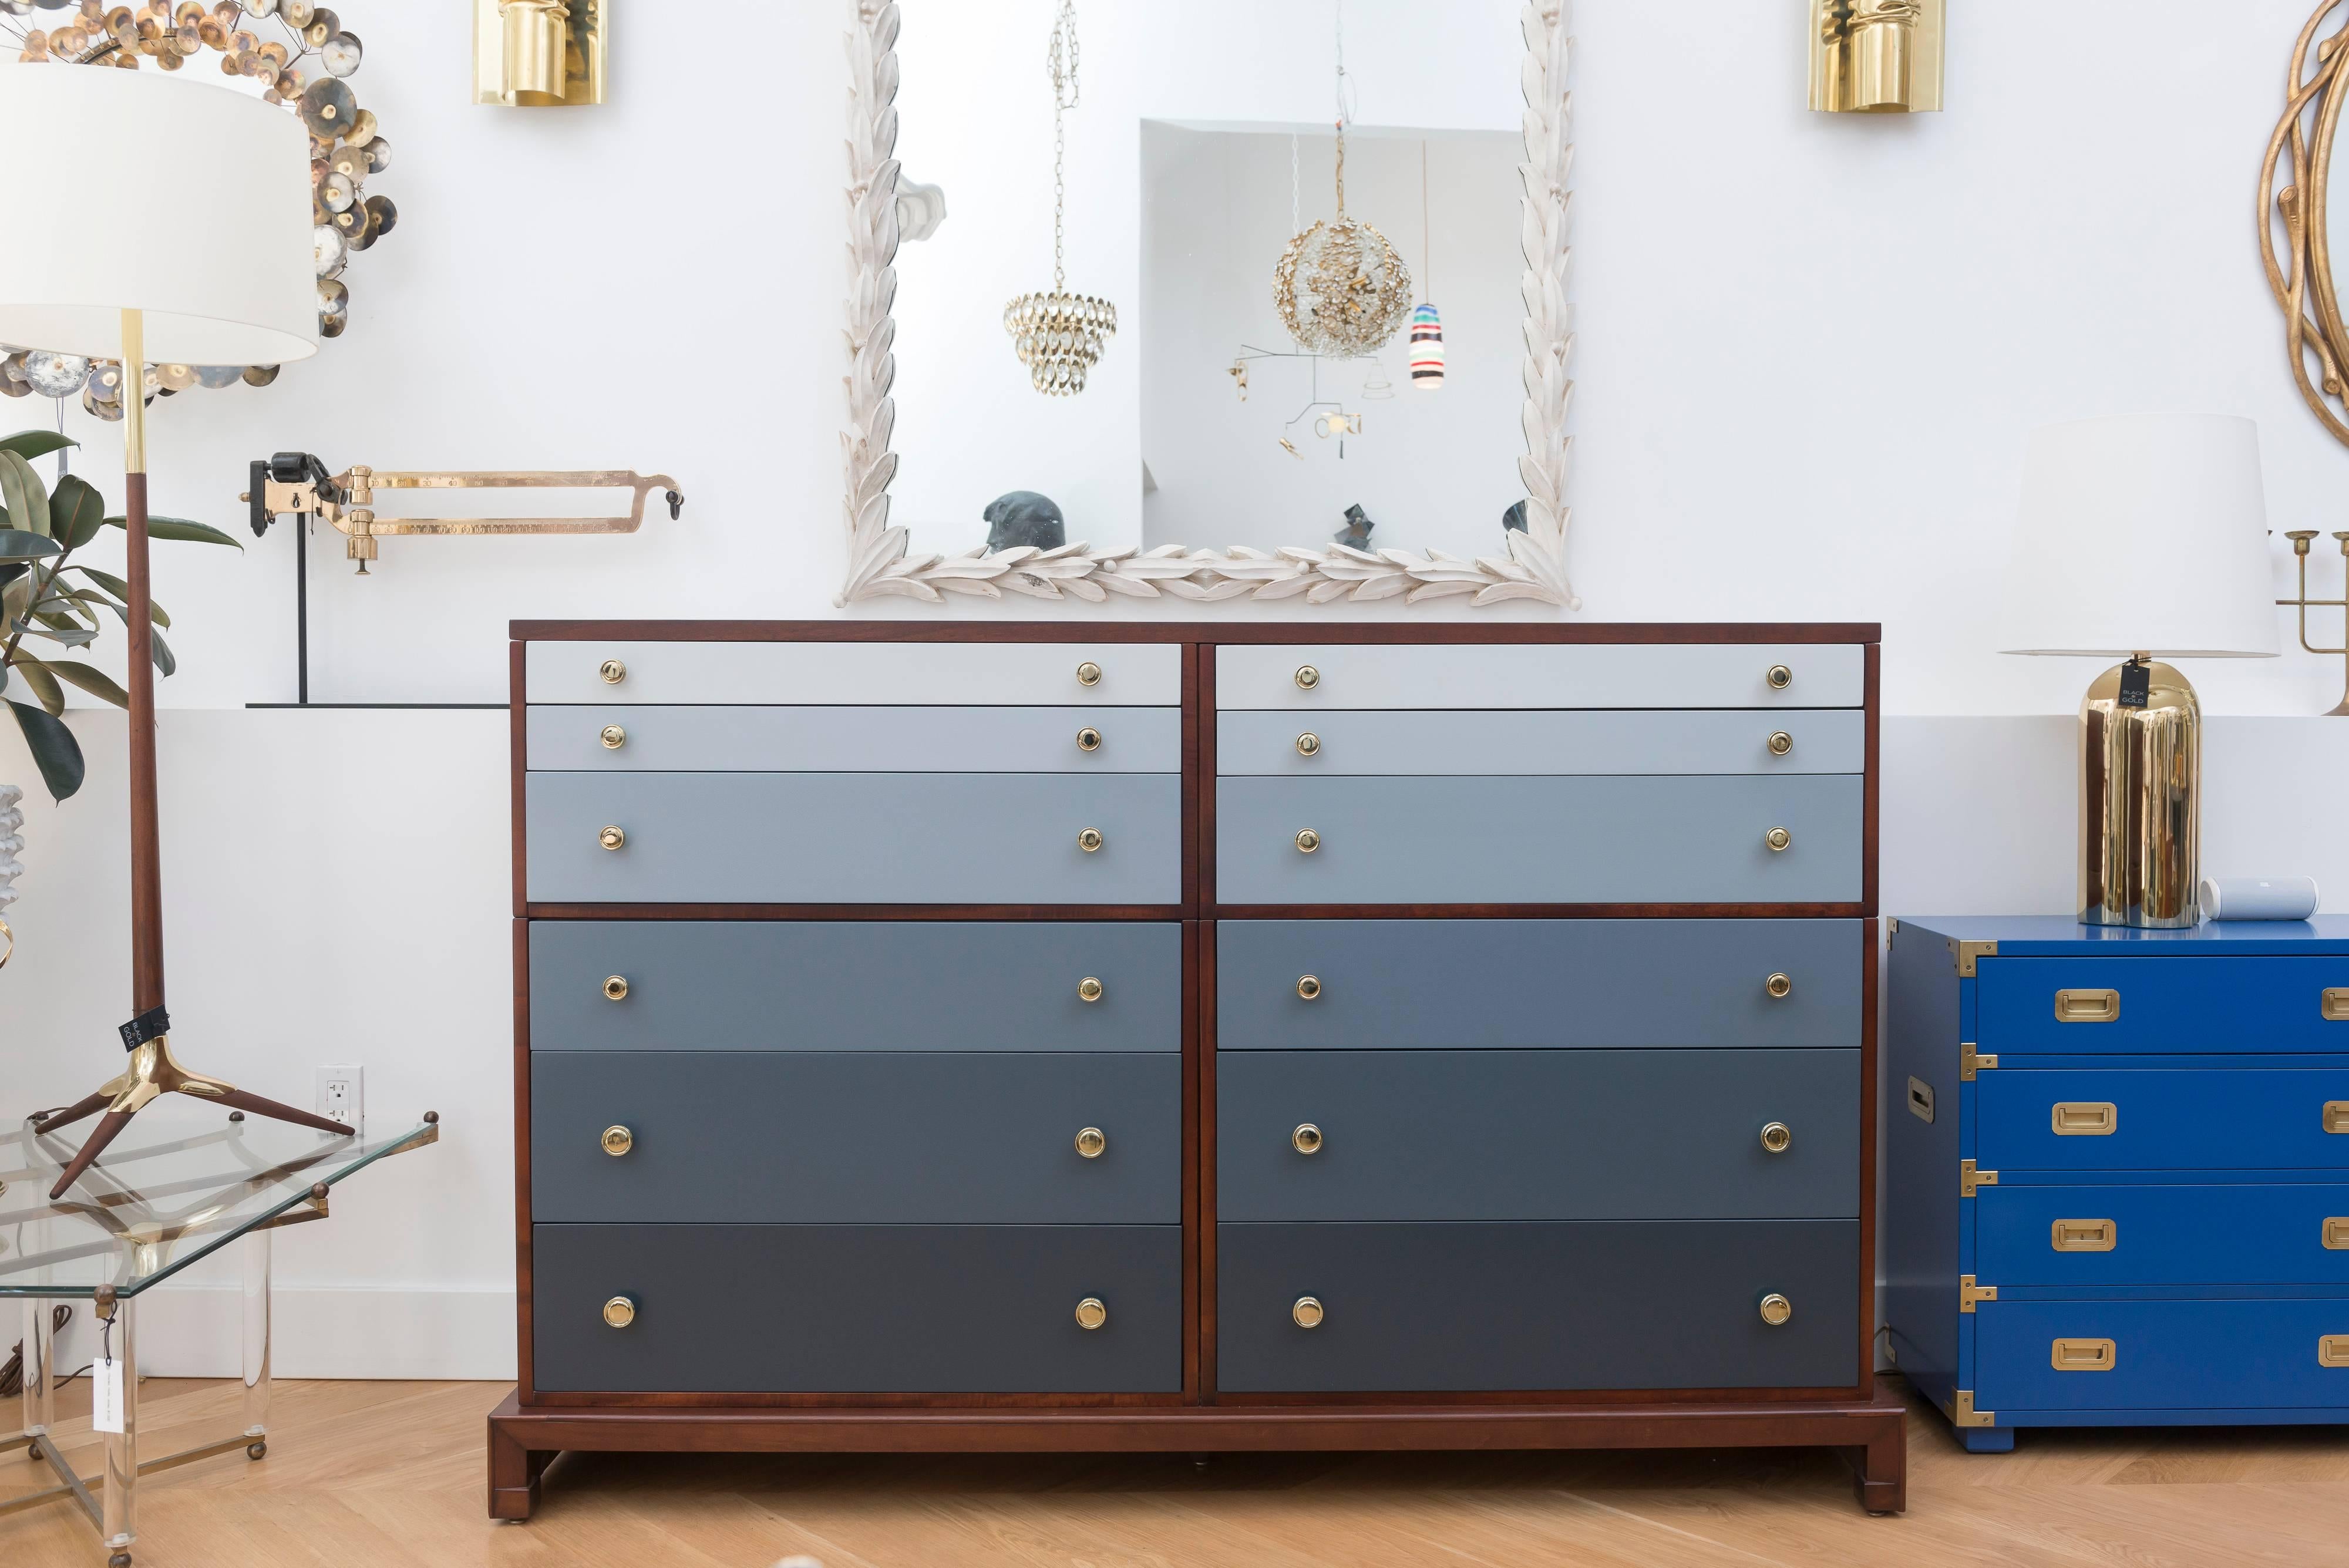 Beautifully restored 12-drawer chest with ombred drawer fronts and brass plated pulls.  This piece is part of The Widdicomb Modern Originals Flexi-Unit series (initially known as the Horizontal Vertical Sectional Modern series), a series that was